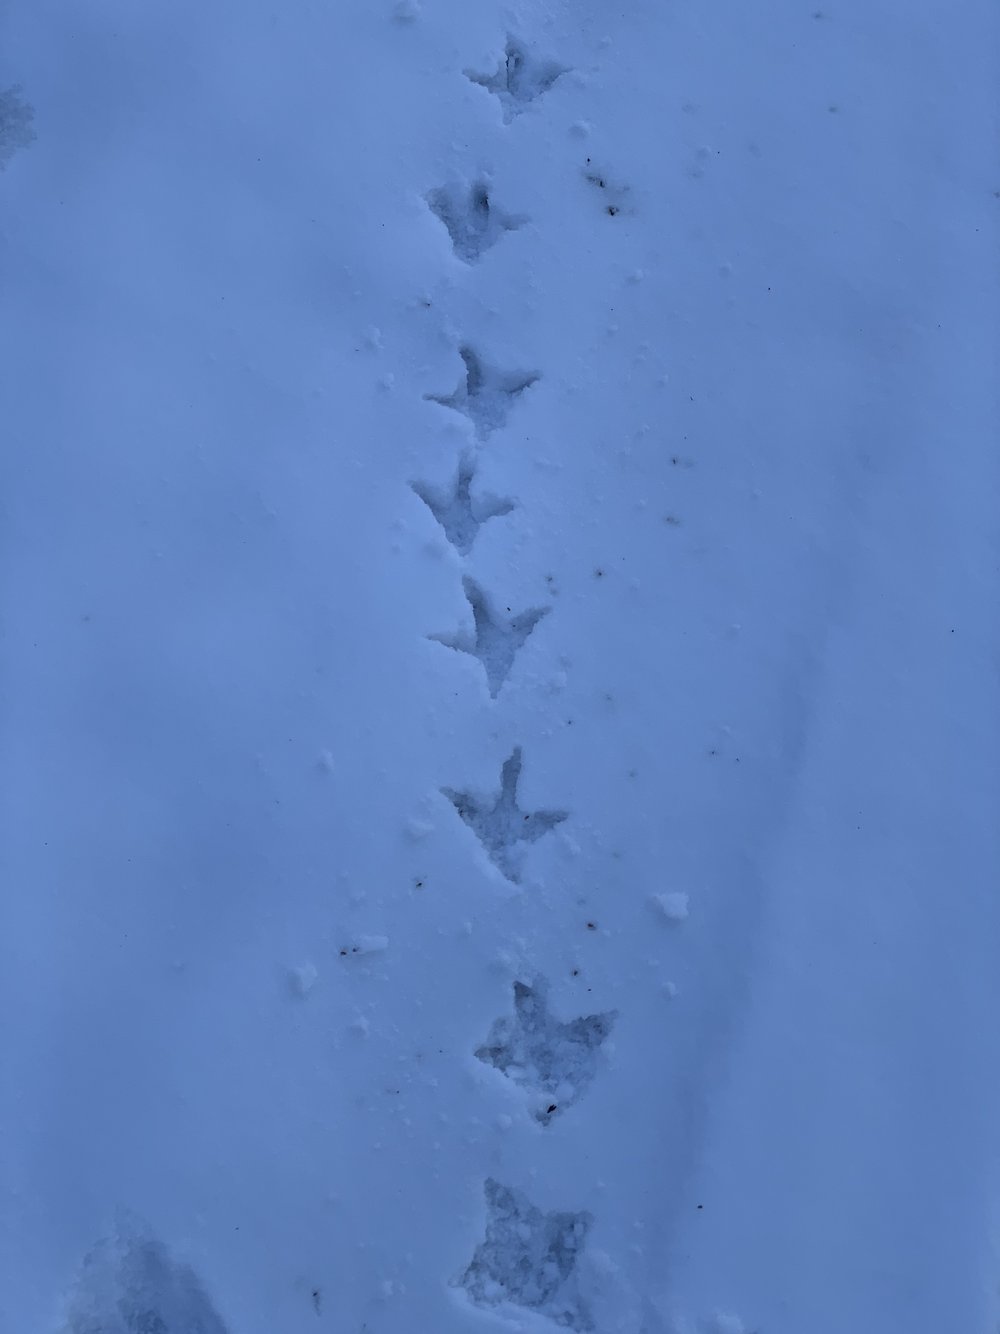   American Crow  footprints in the new snow. 